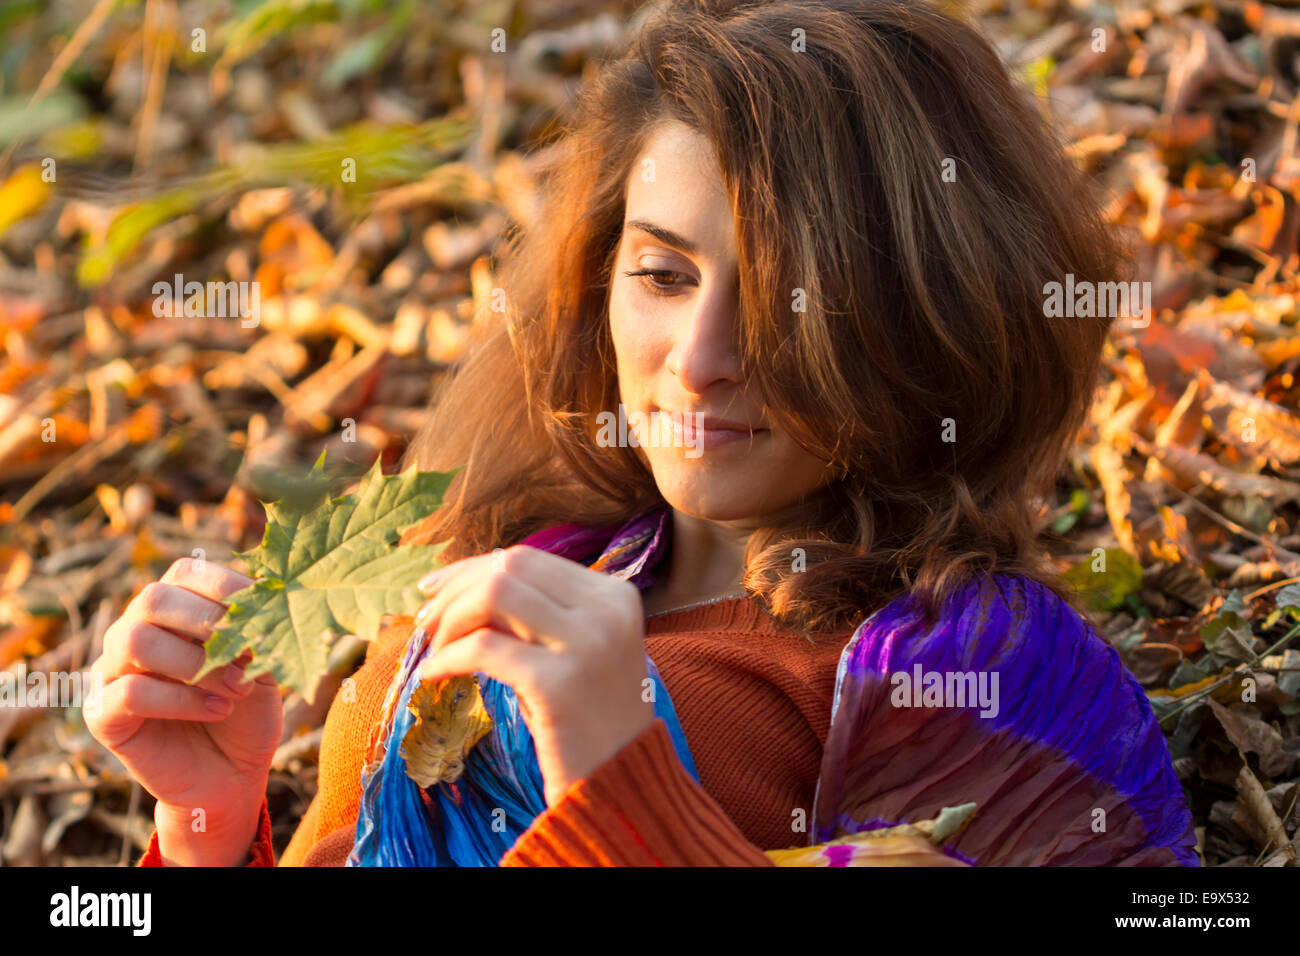 Portrait of young woman in autumn season looking to a leaf, outdoor shot Stock Photo